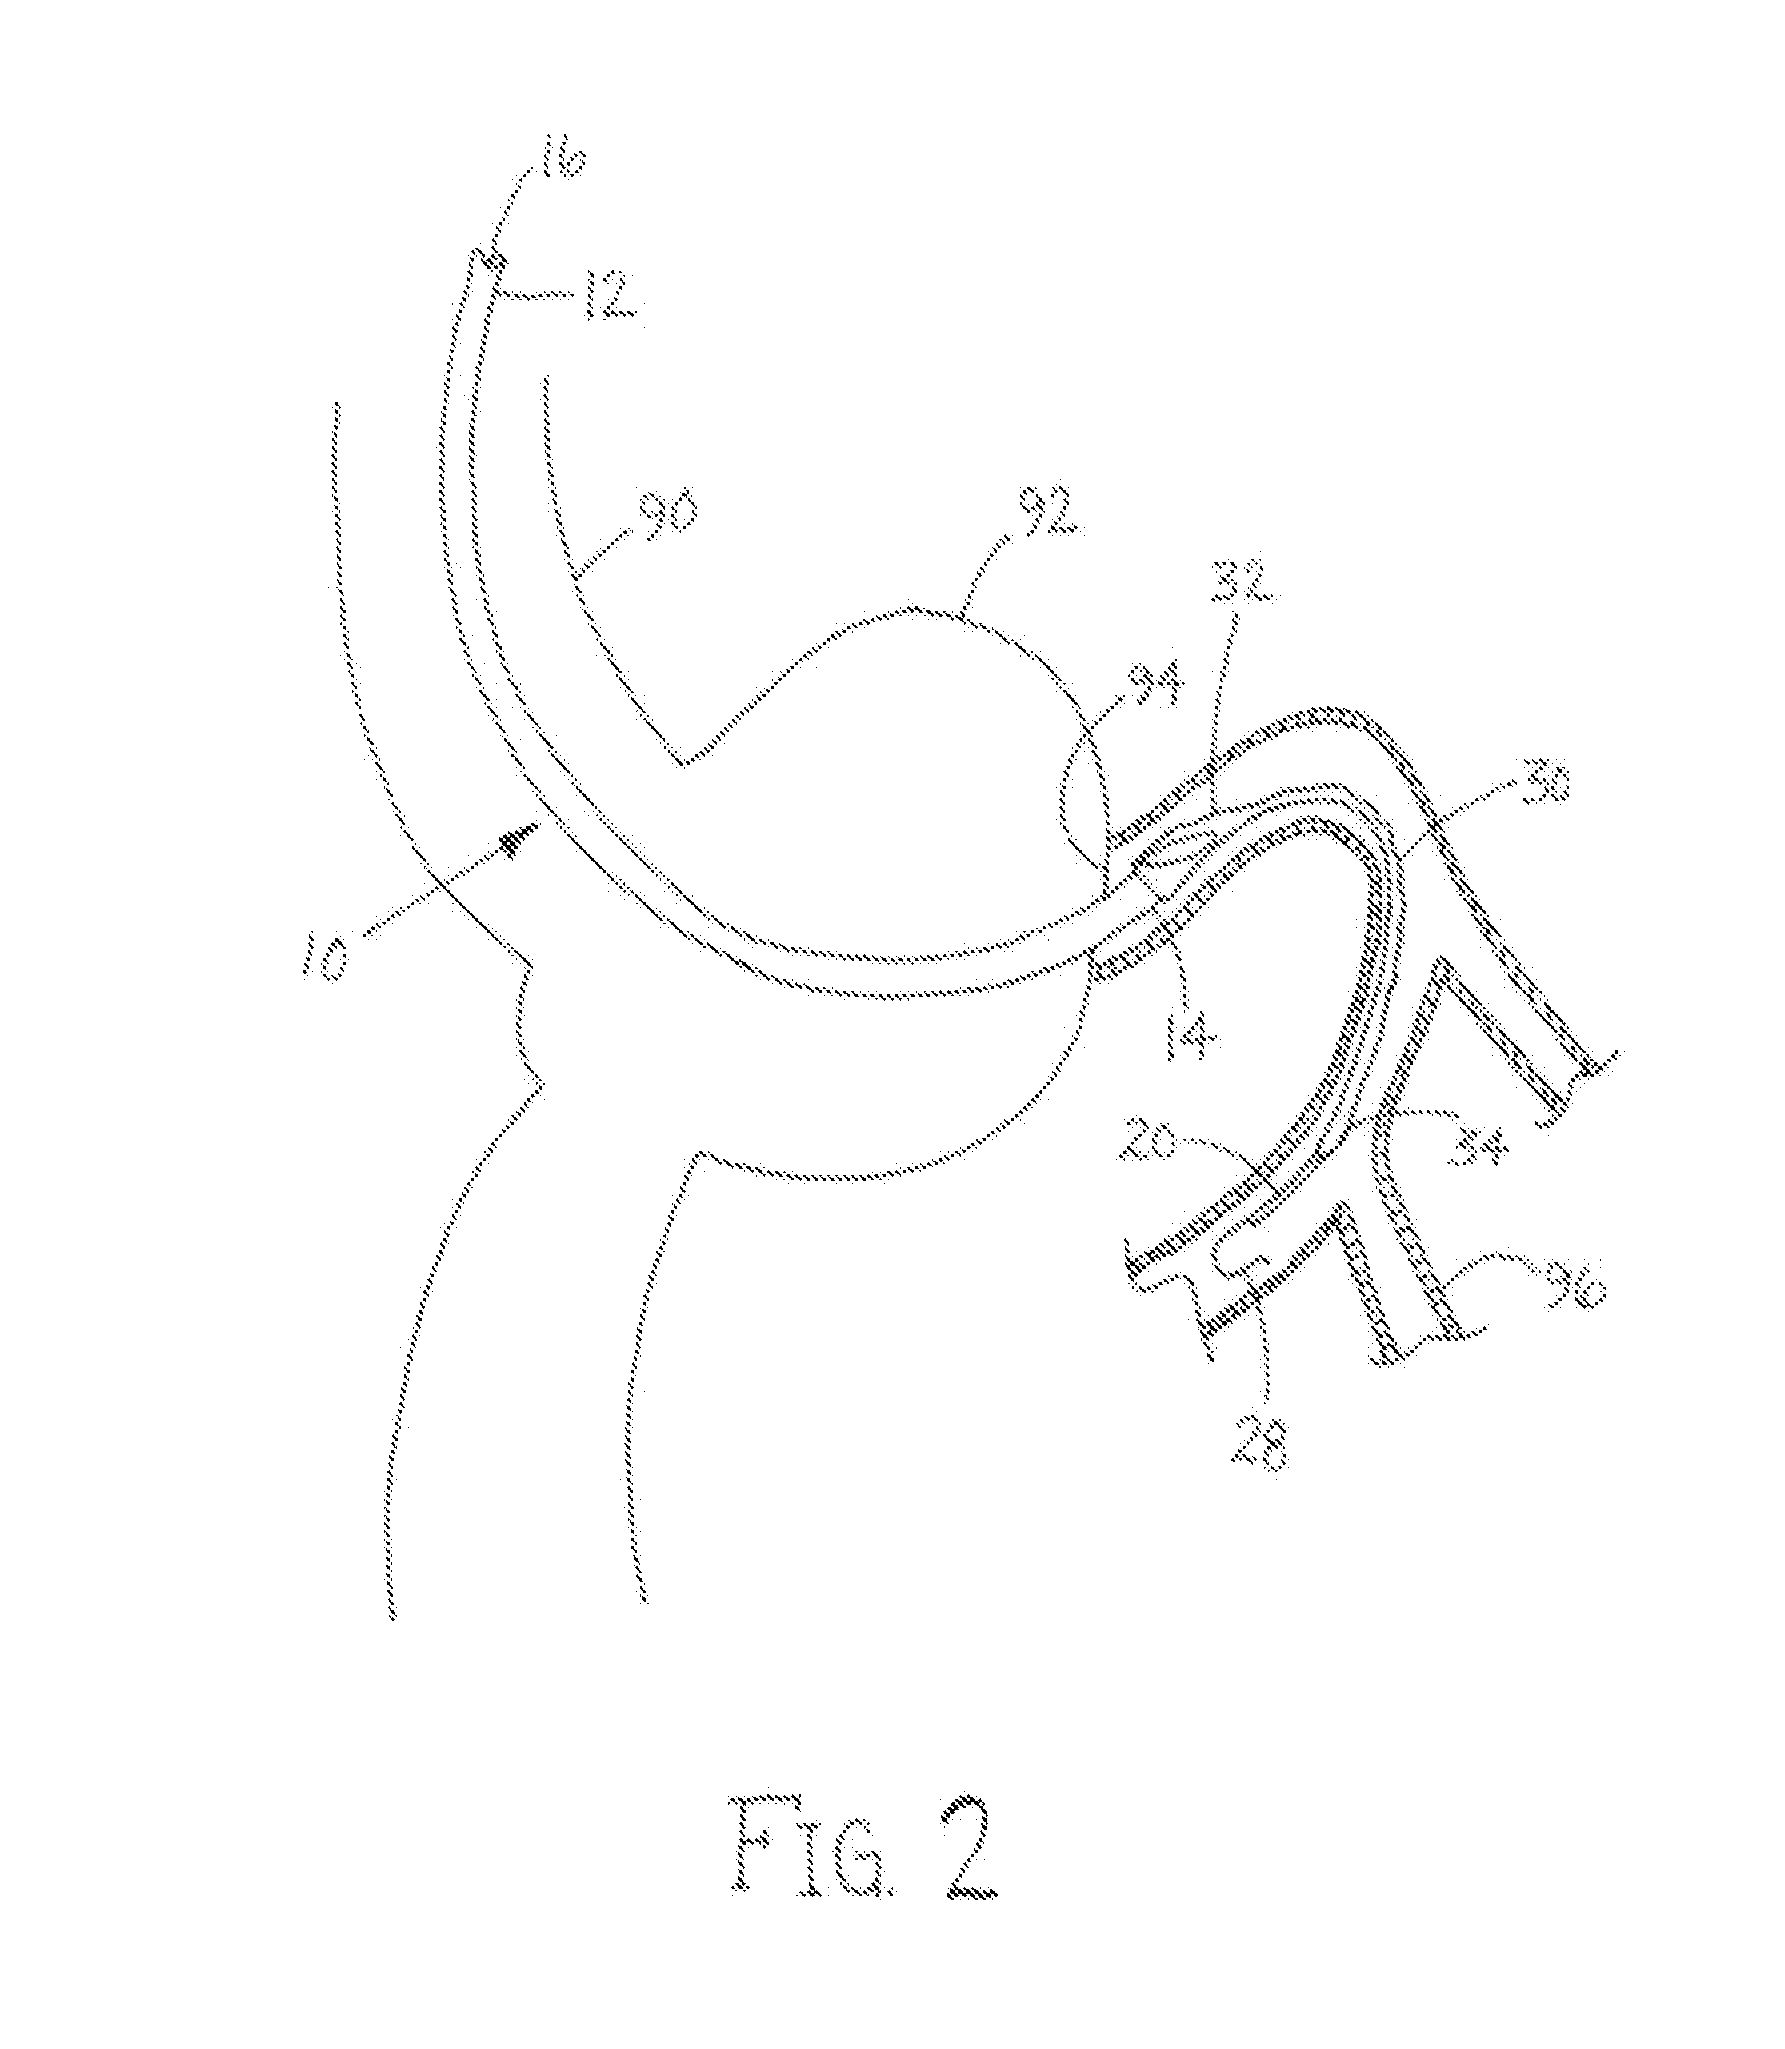 Apparatus and methods for delivering stem cells and other agents into cardiac tissue